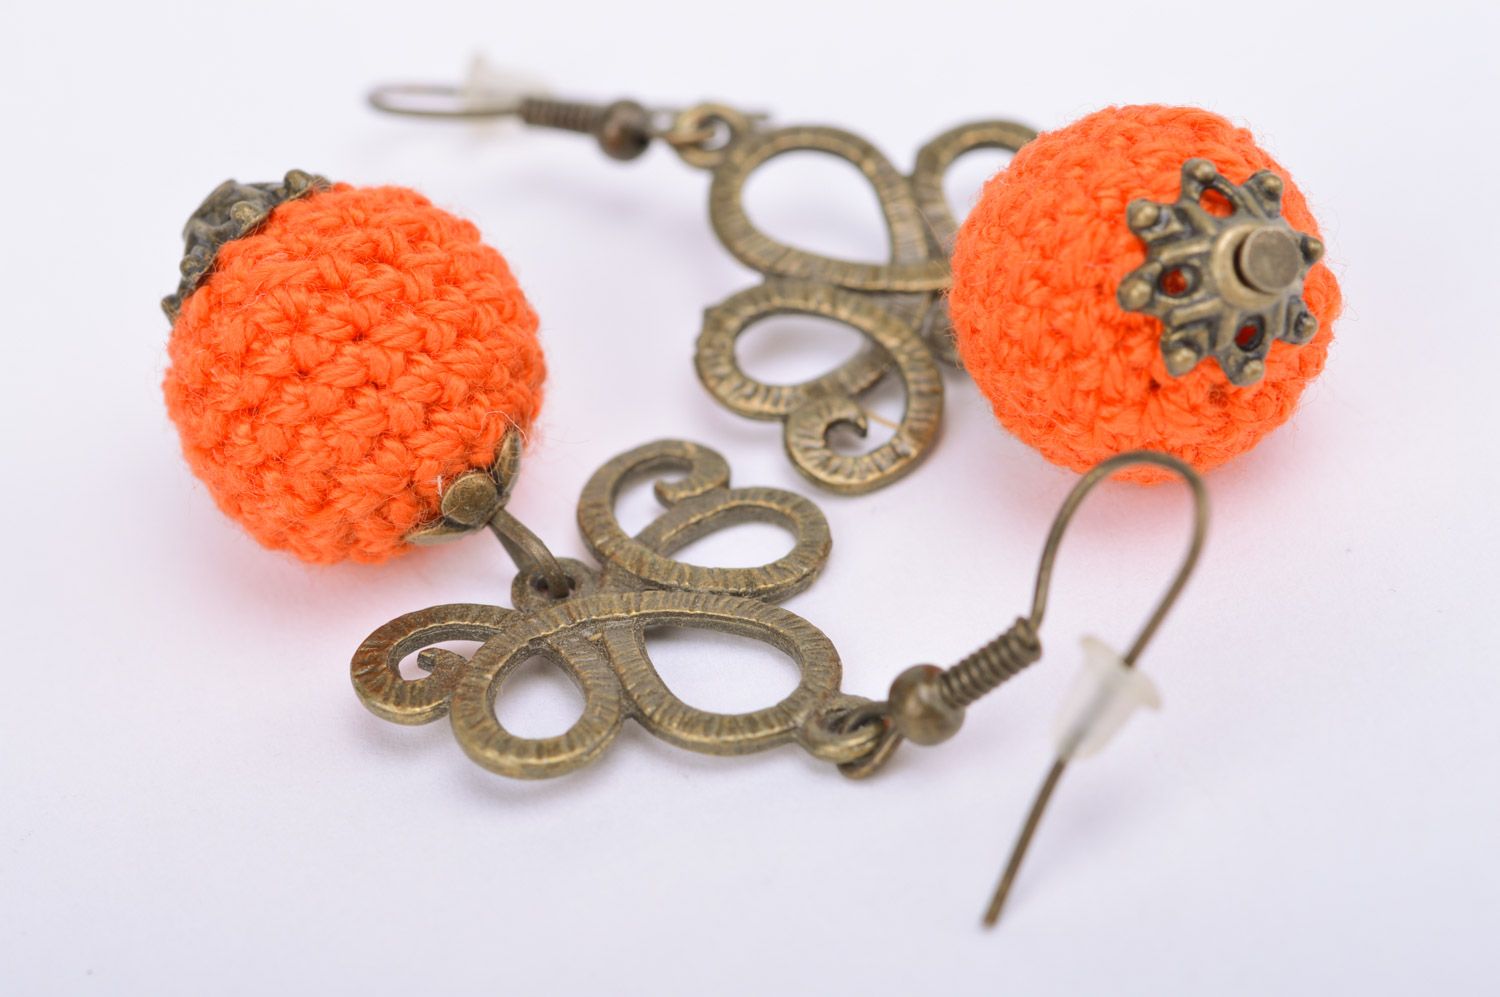 Handmade long earrings with crochet over beads and vintage fittings photo 1